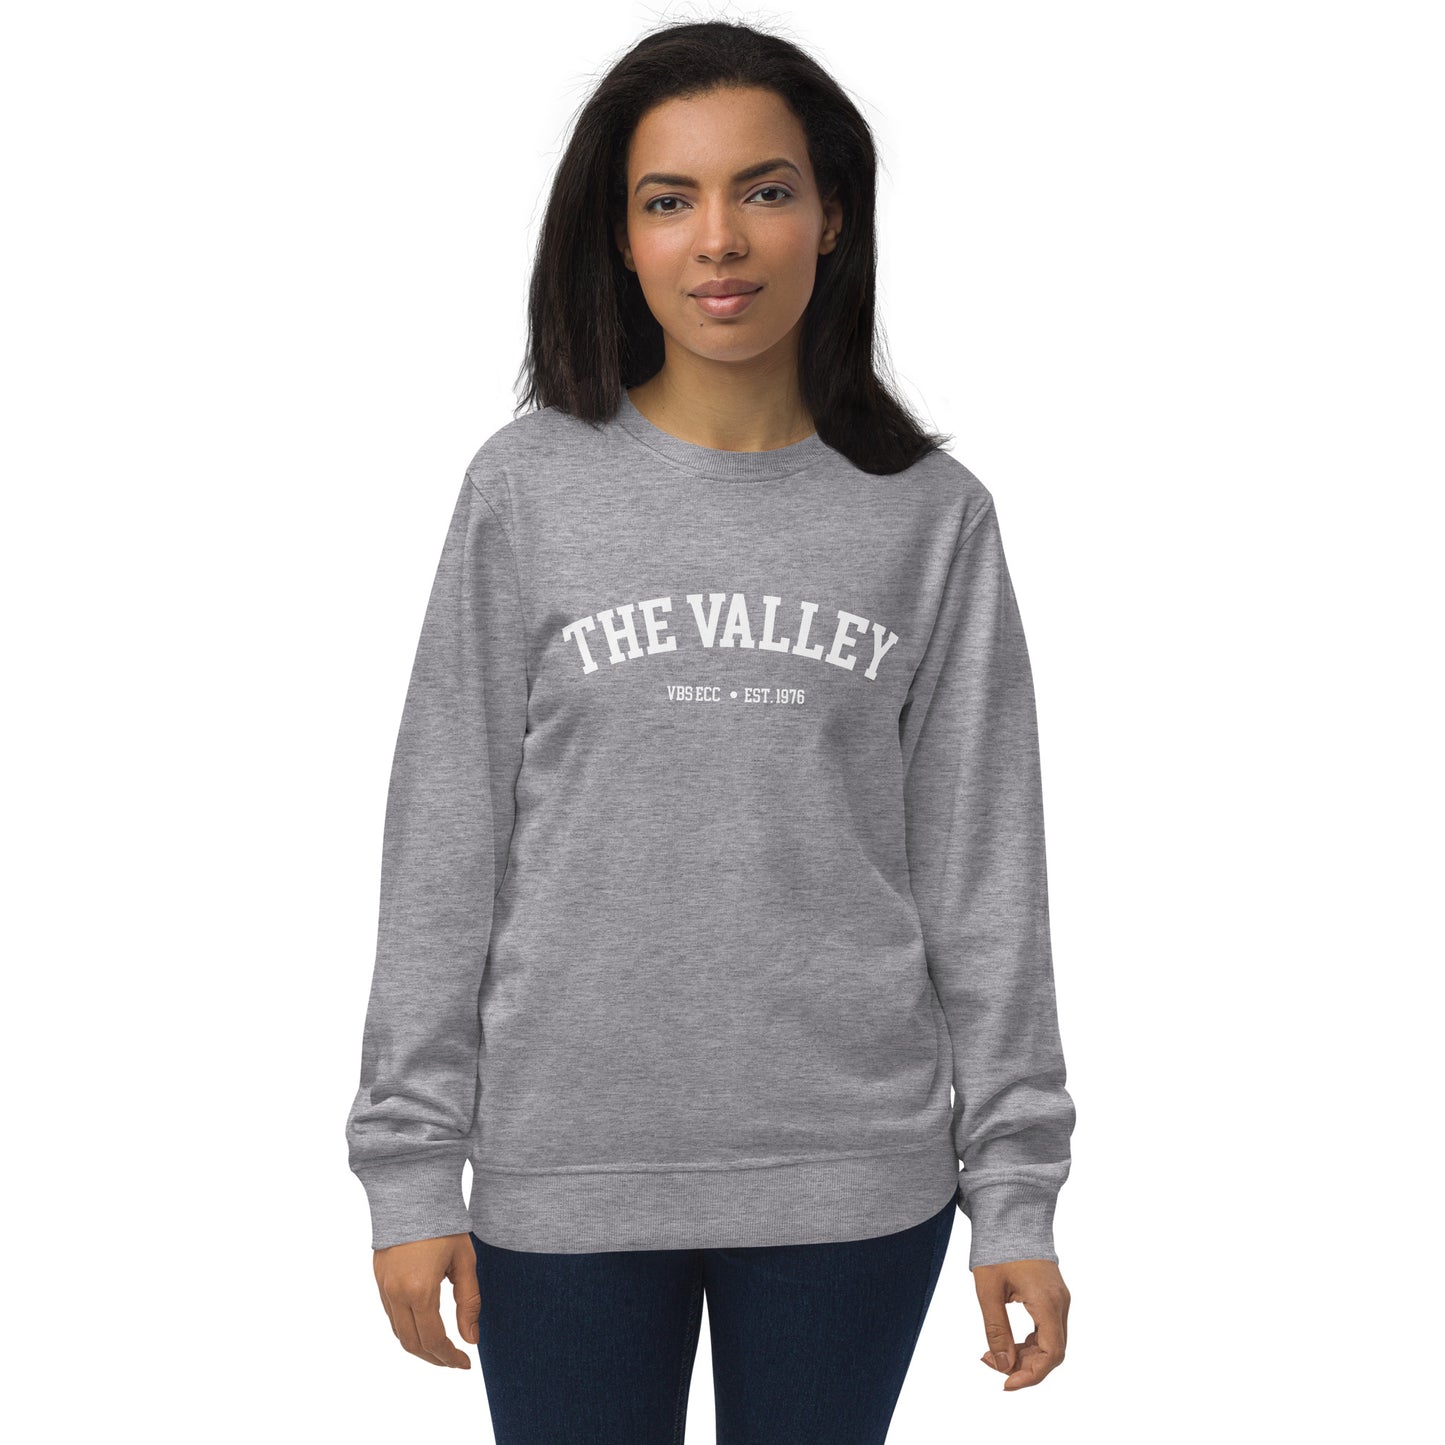 "The Valley" Vintage Relaxed Organic Unisex Sweatshirt